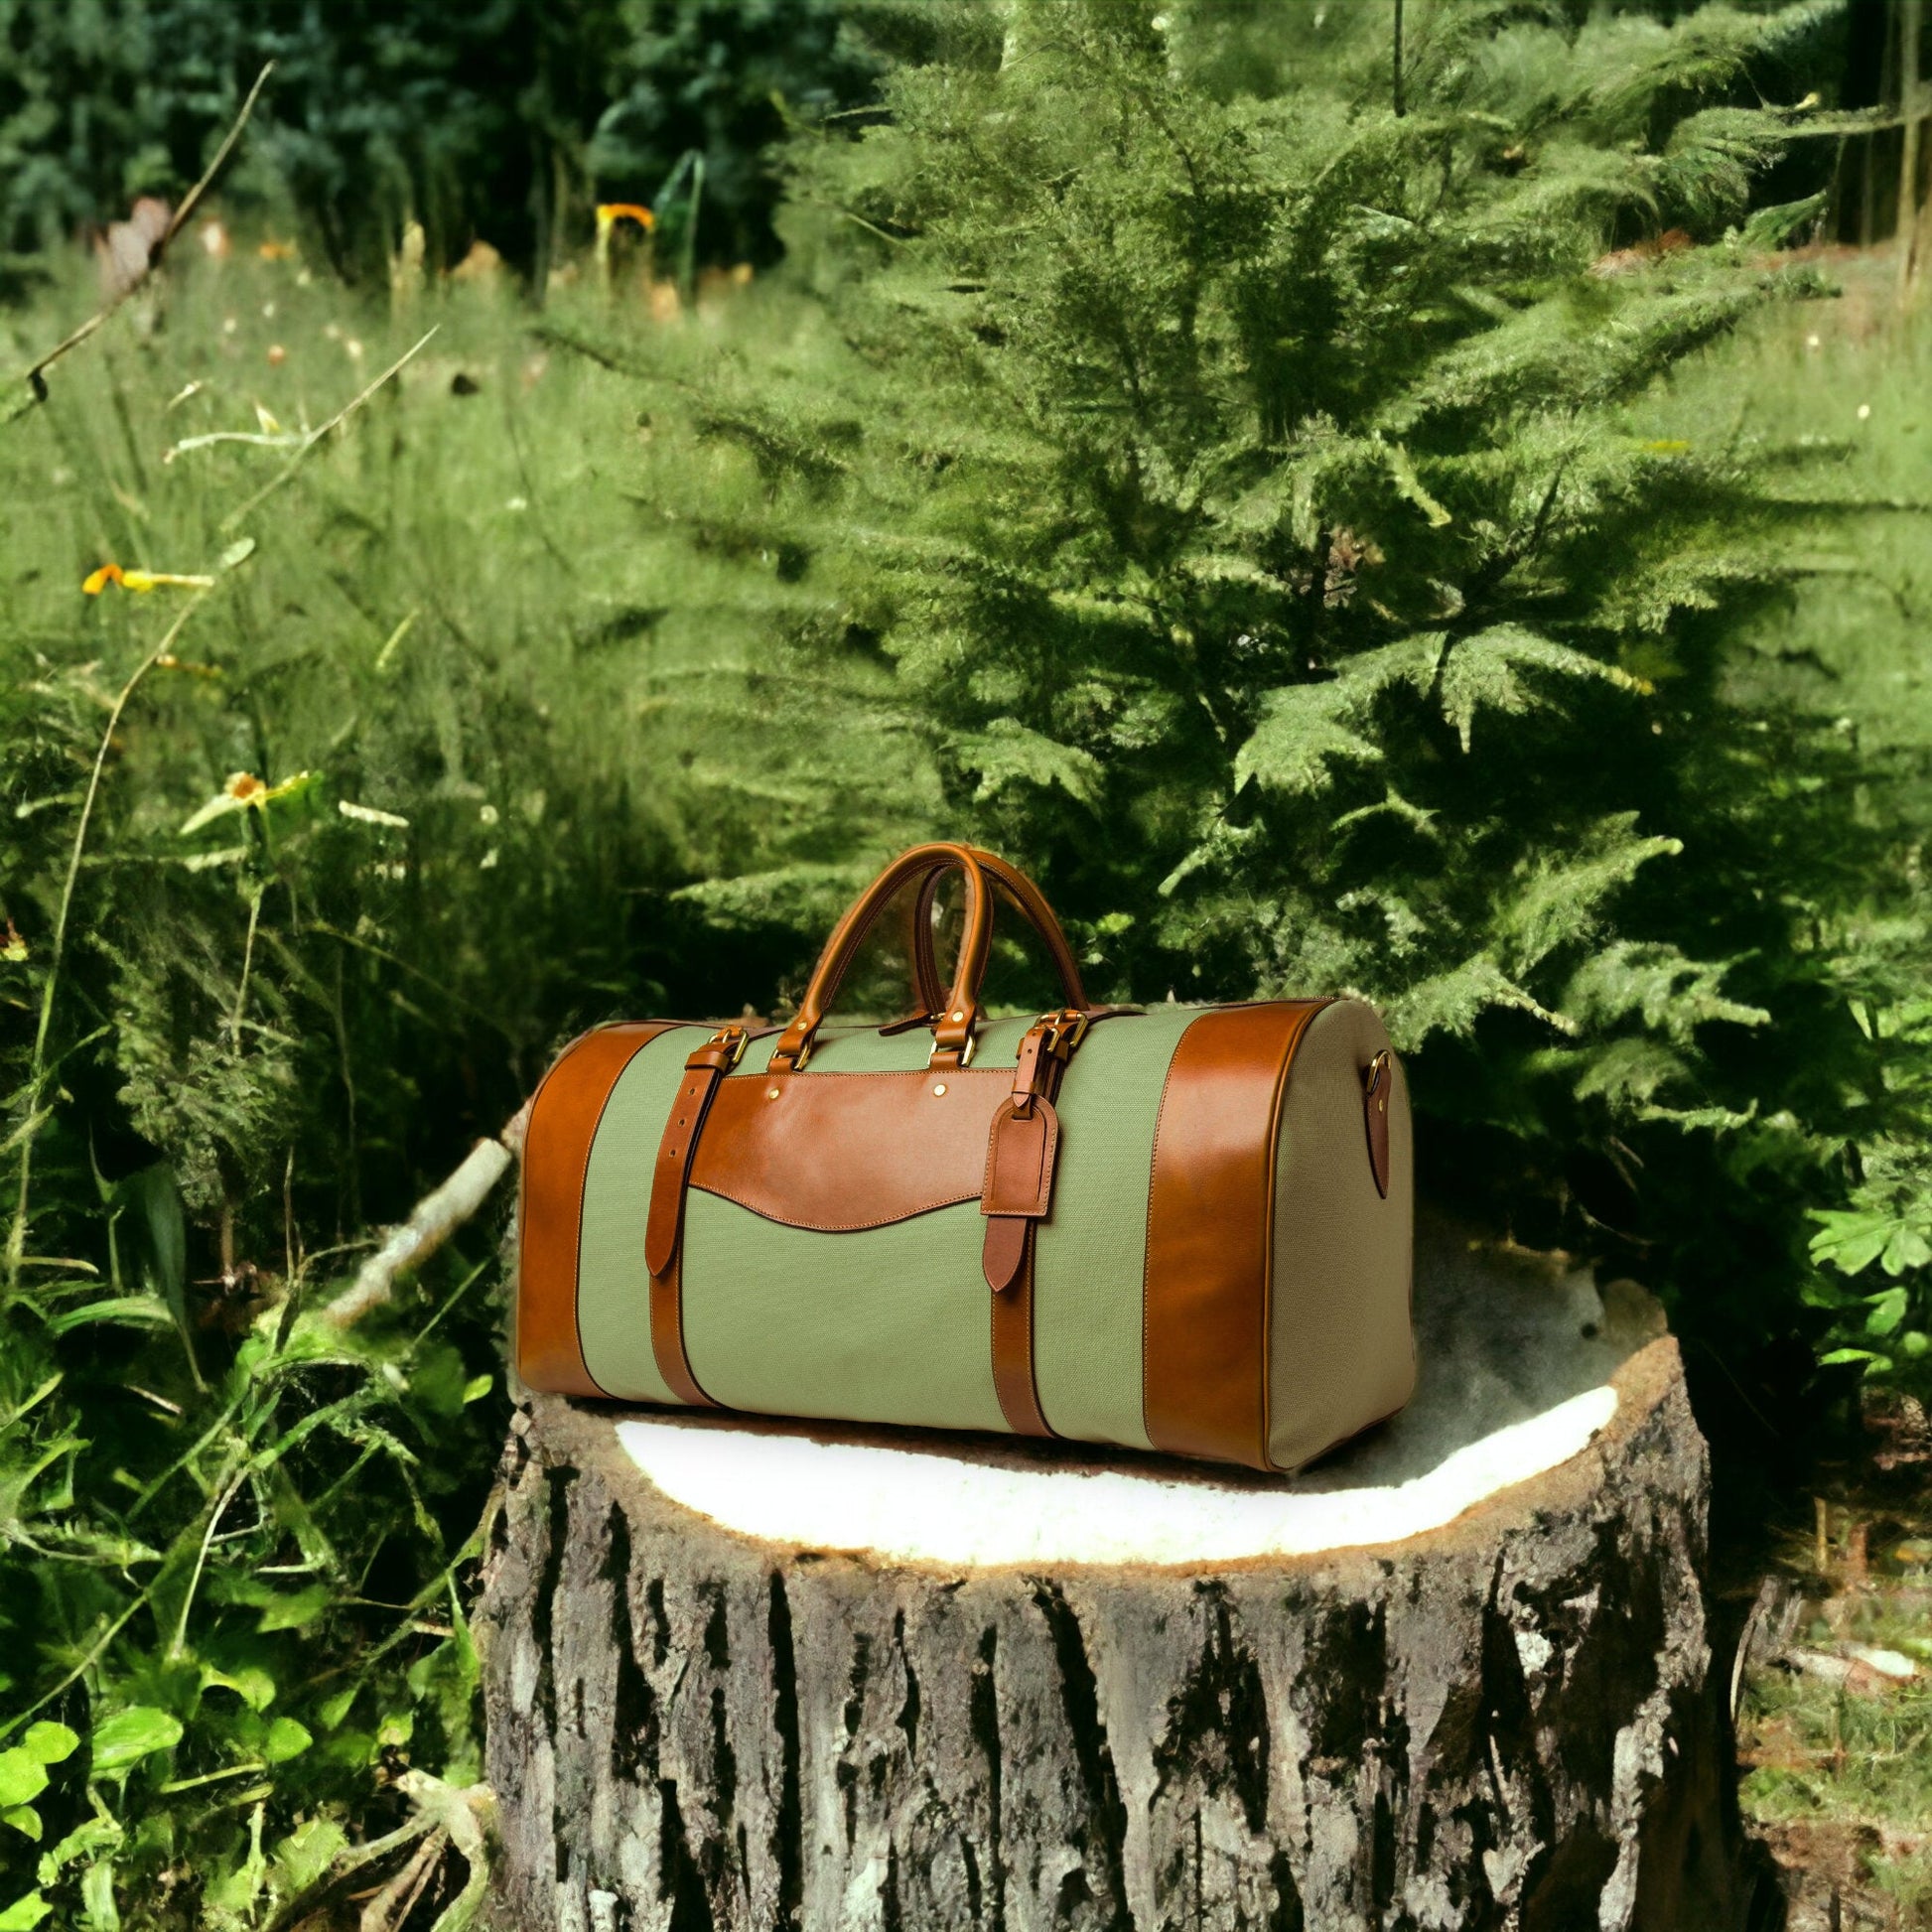 Leather and Canvas | Duffle Bag | Handmade Duffle Bag  | Weekend Bag | Travel | Leather Bag | Duffle Purse Crossbody | Limited  99percenthandmade Green - Tan Small - Liner No 